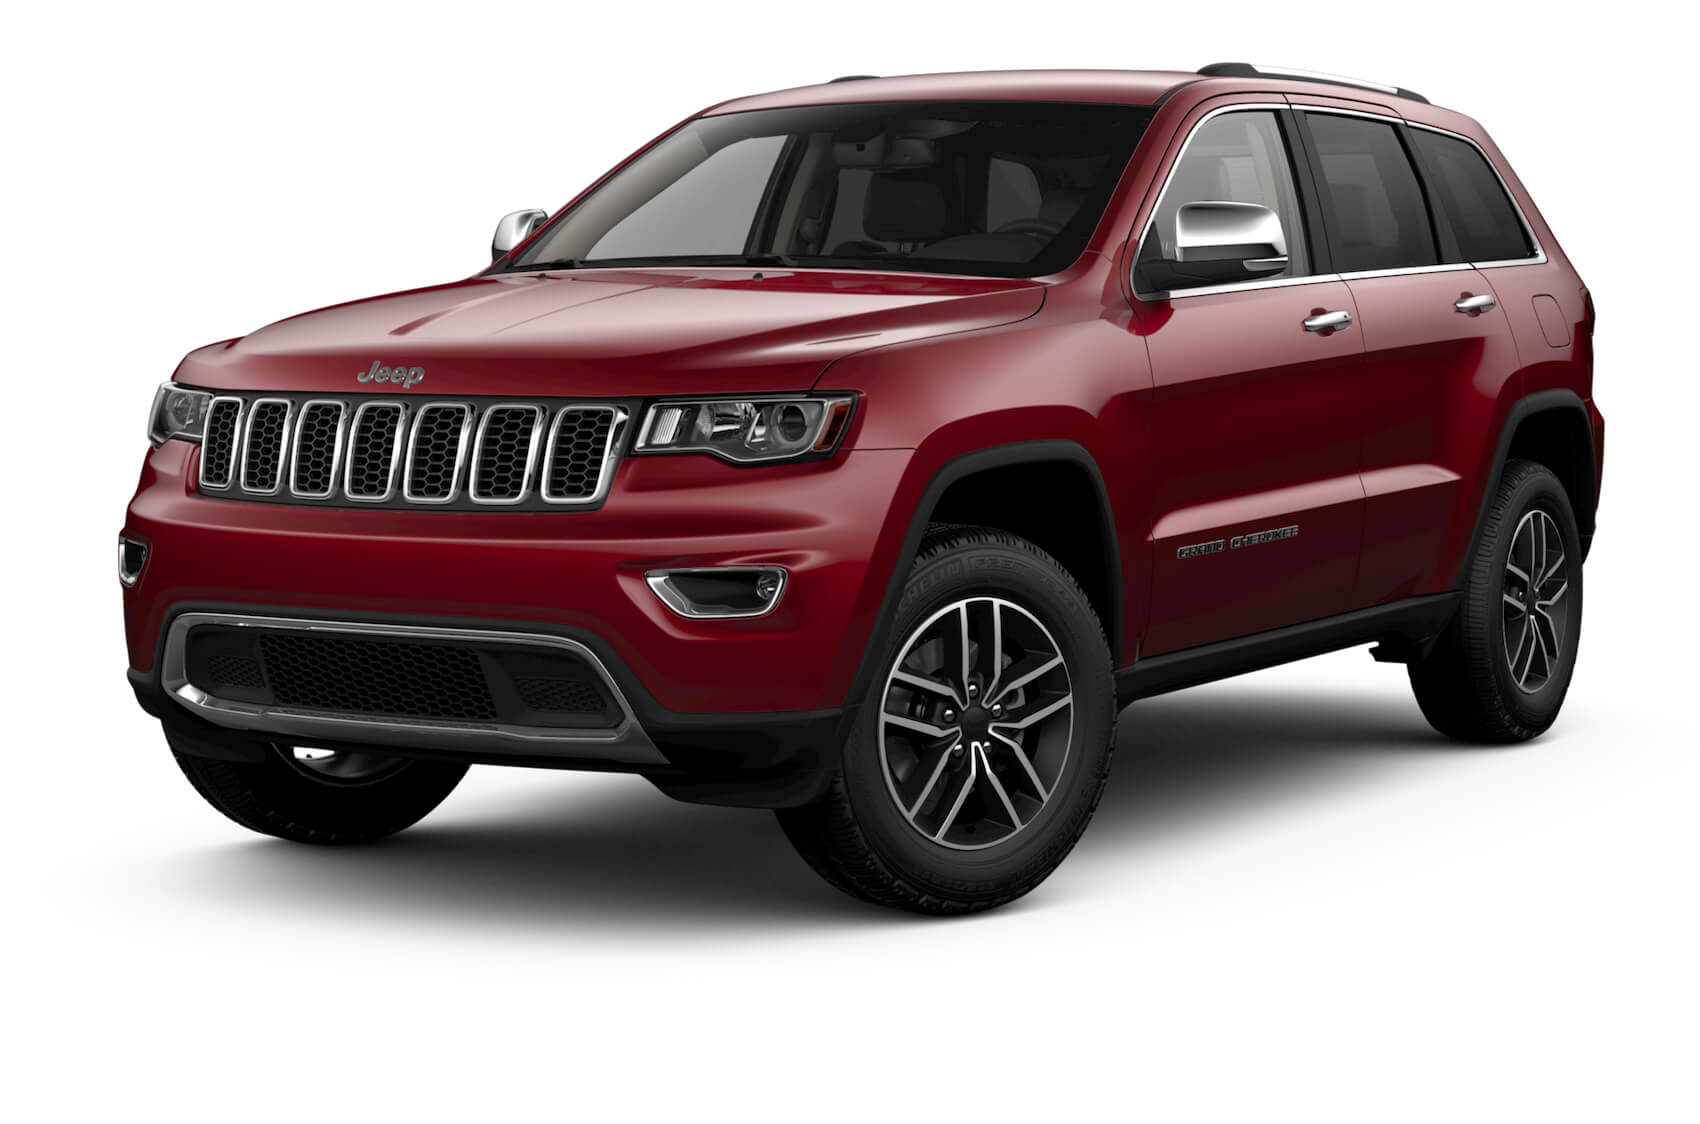 2020 Jeep Grand Cherokee Used Car Dealer Clarks Summit, PA